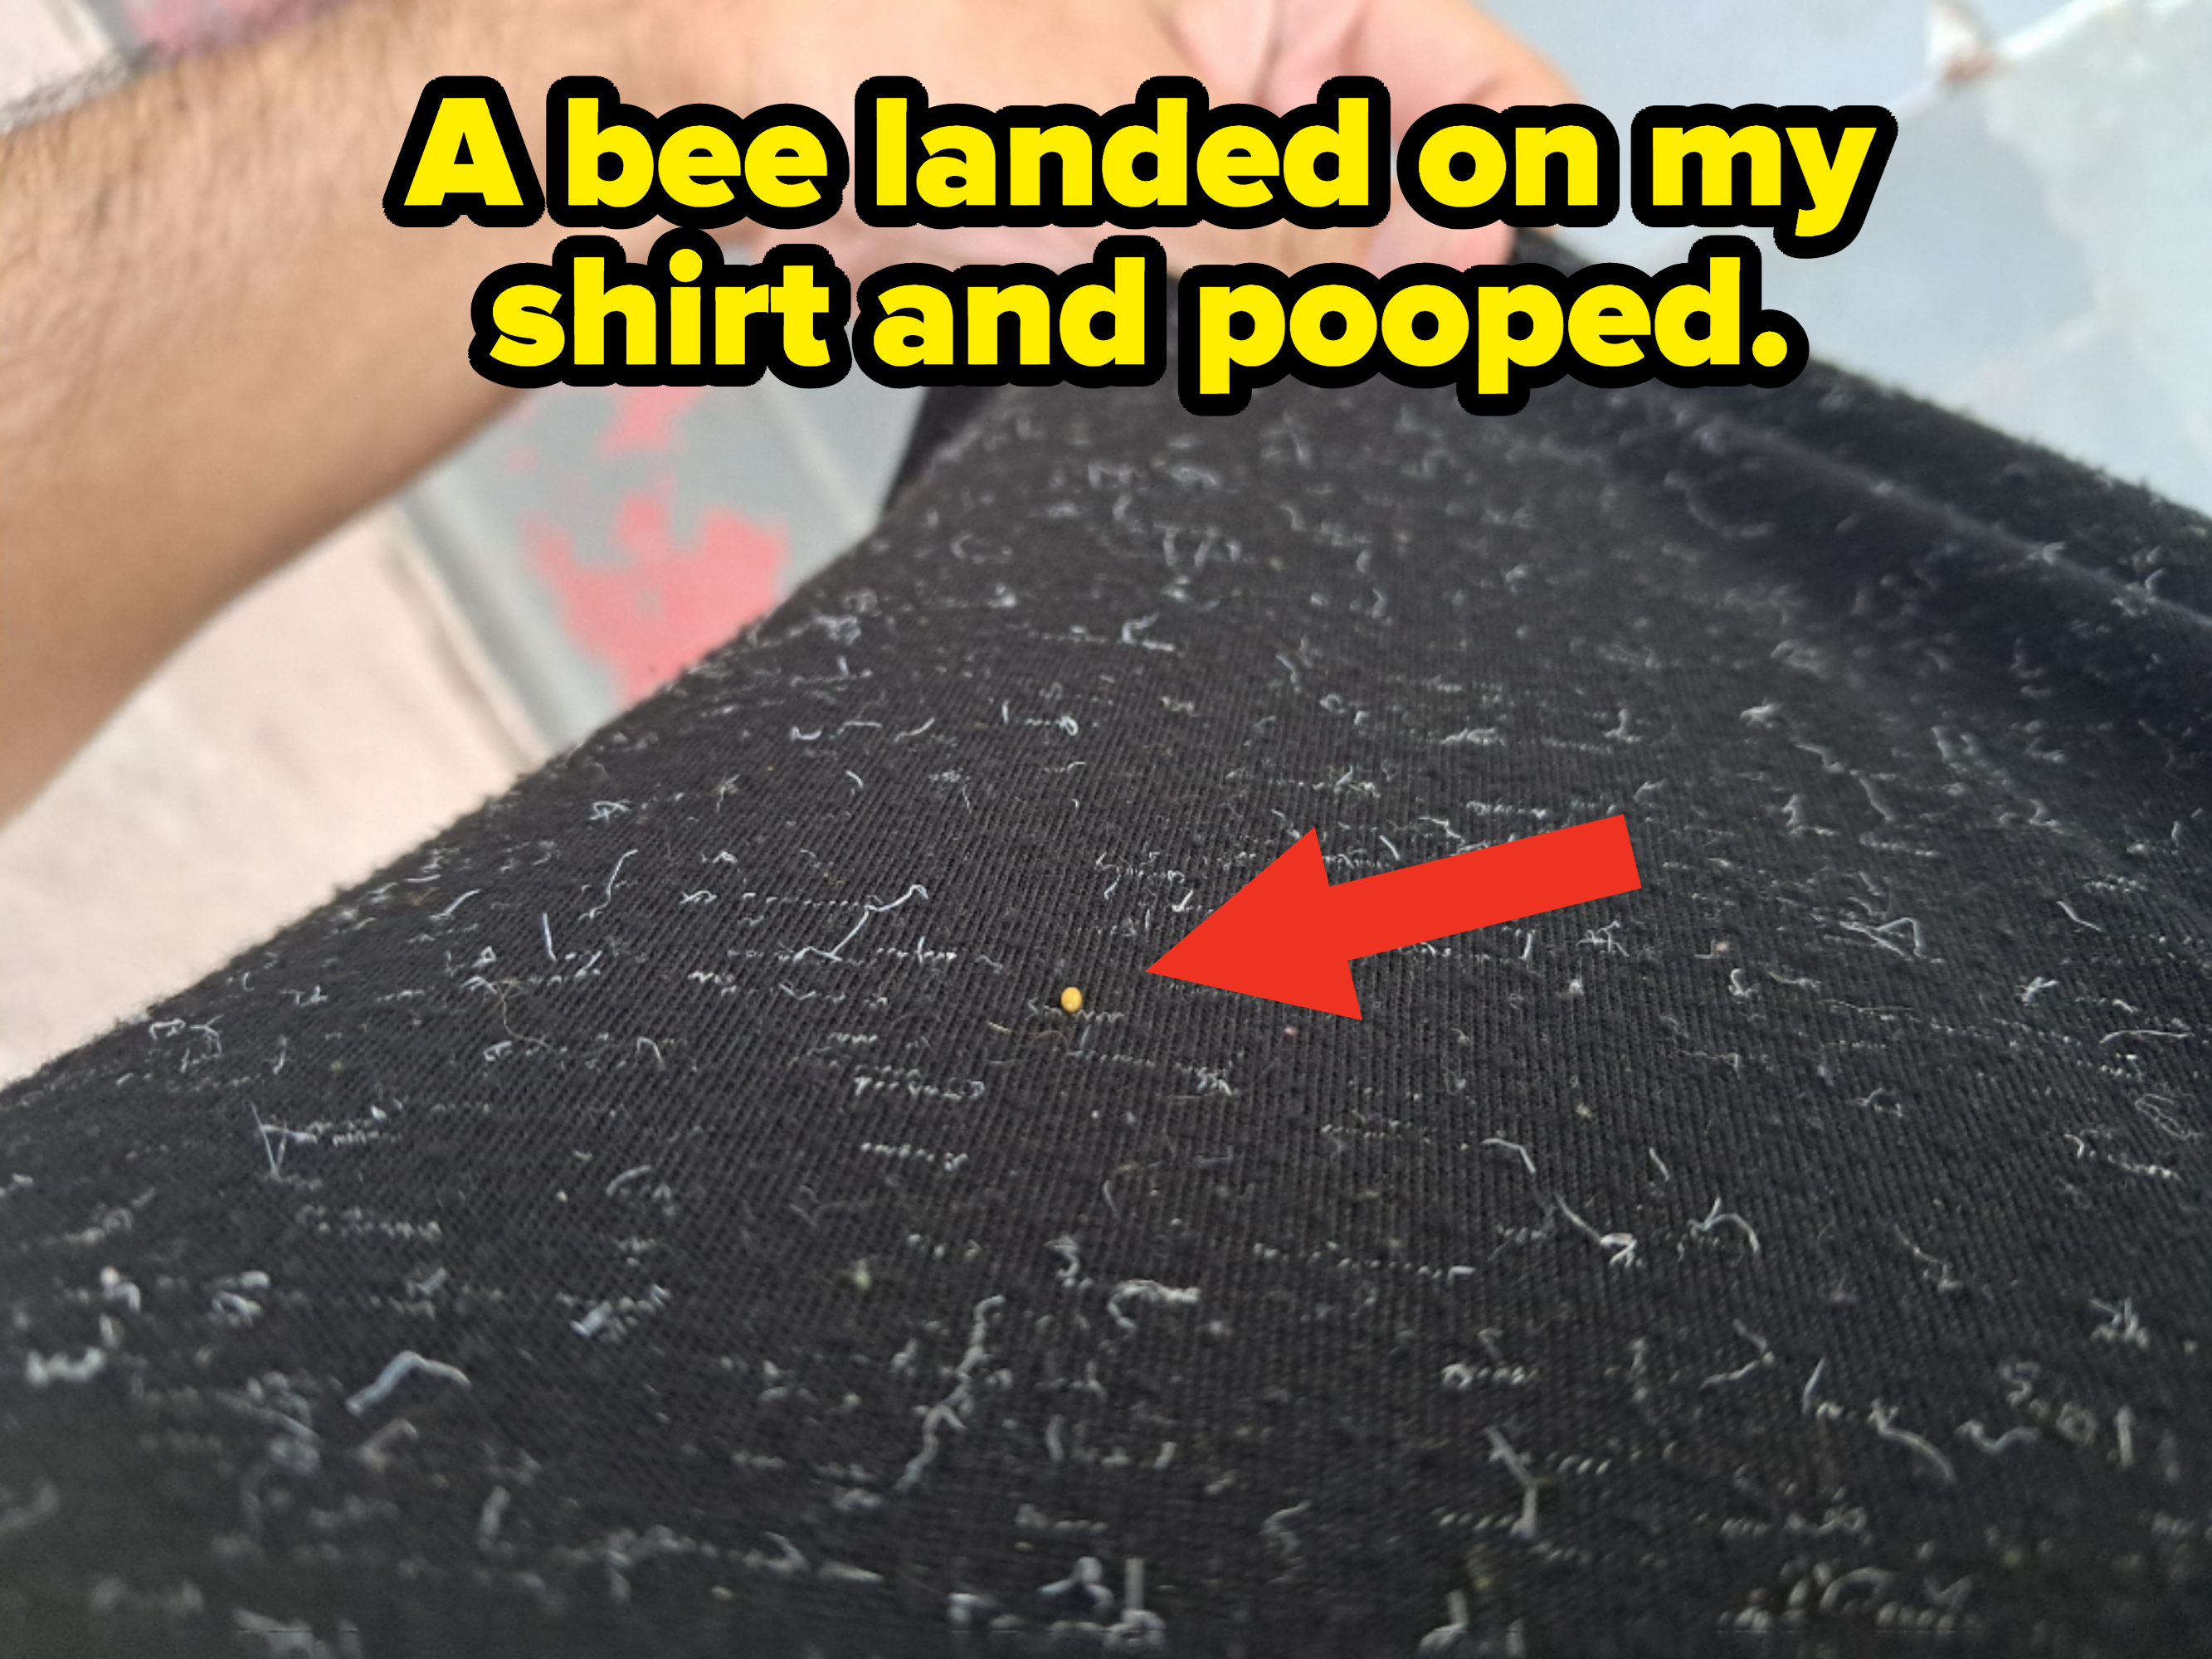 bee landed on a shirt and pooped